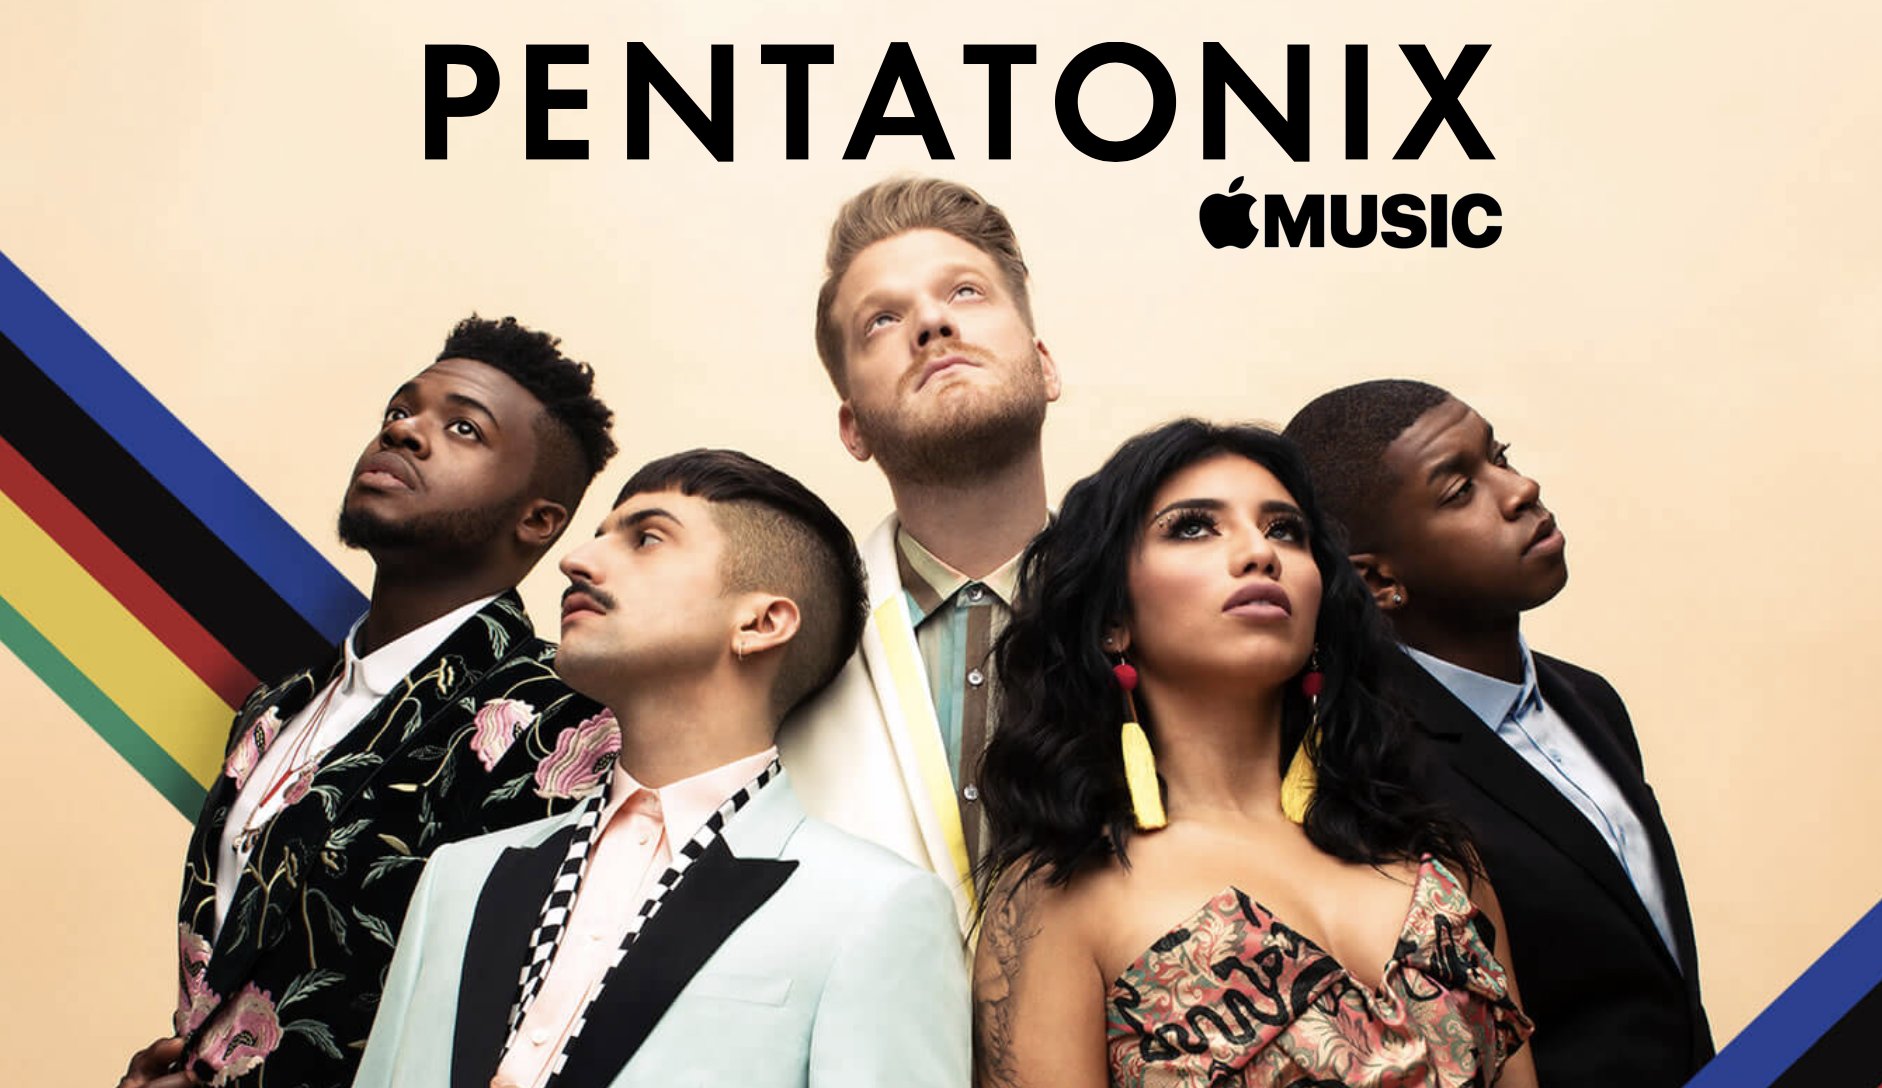 Pentatonix On Twitter We Have The Best Fans In The World To Thank